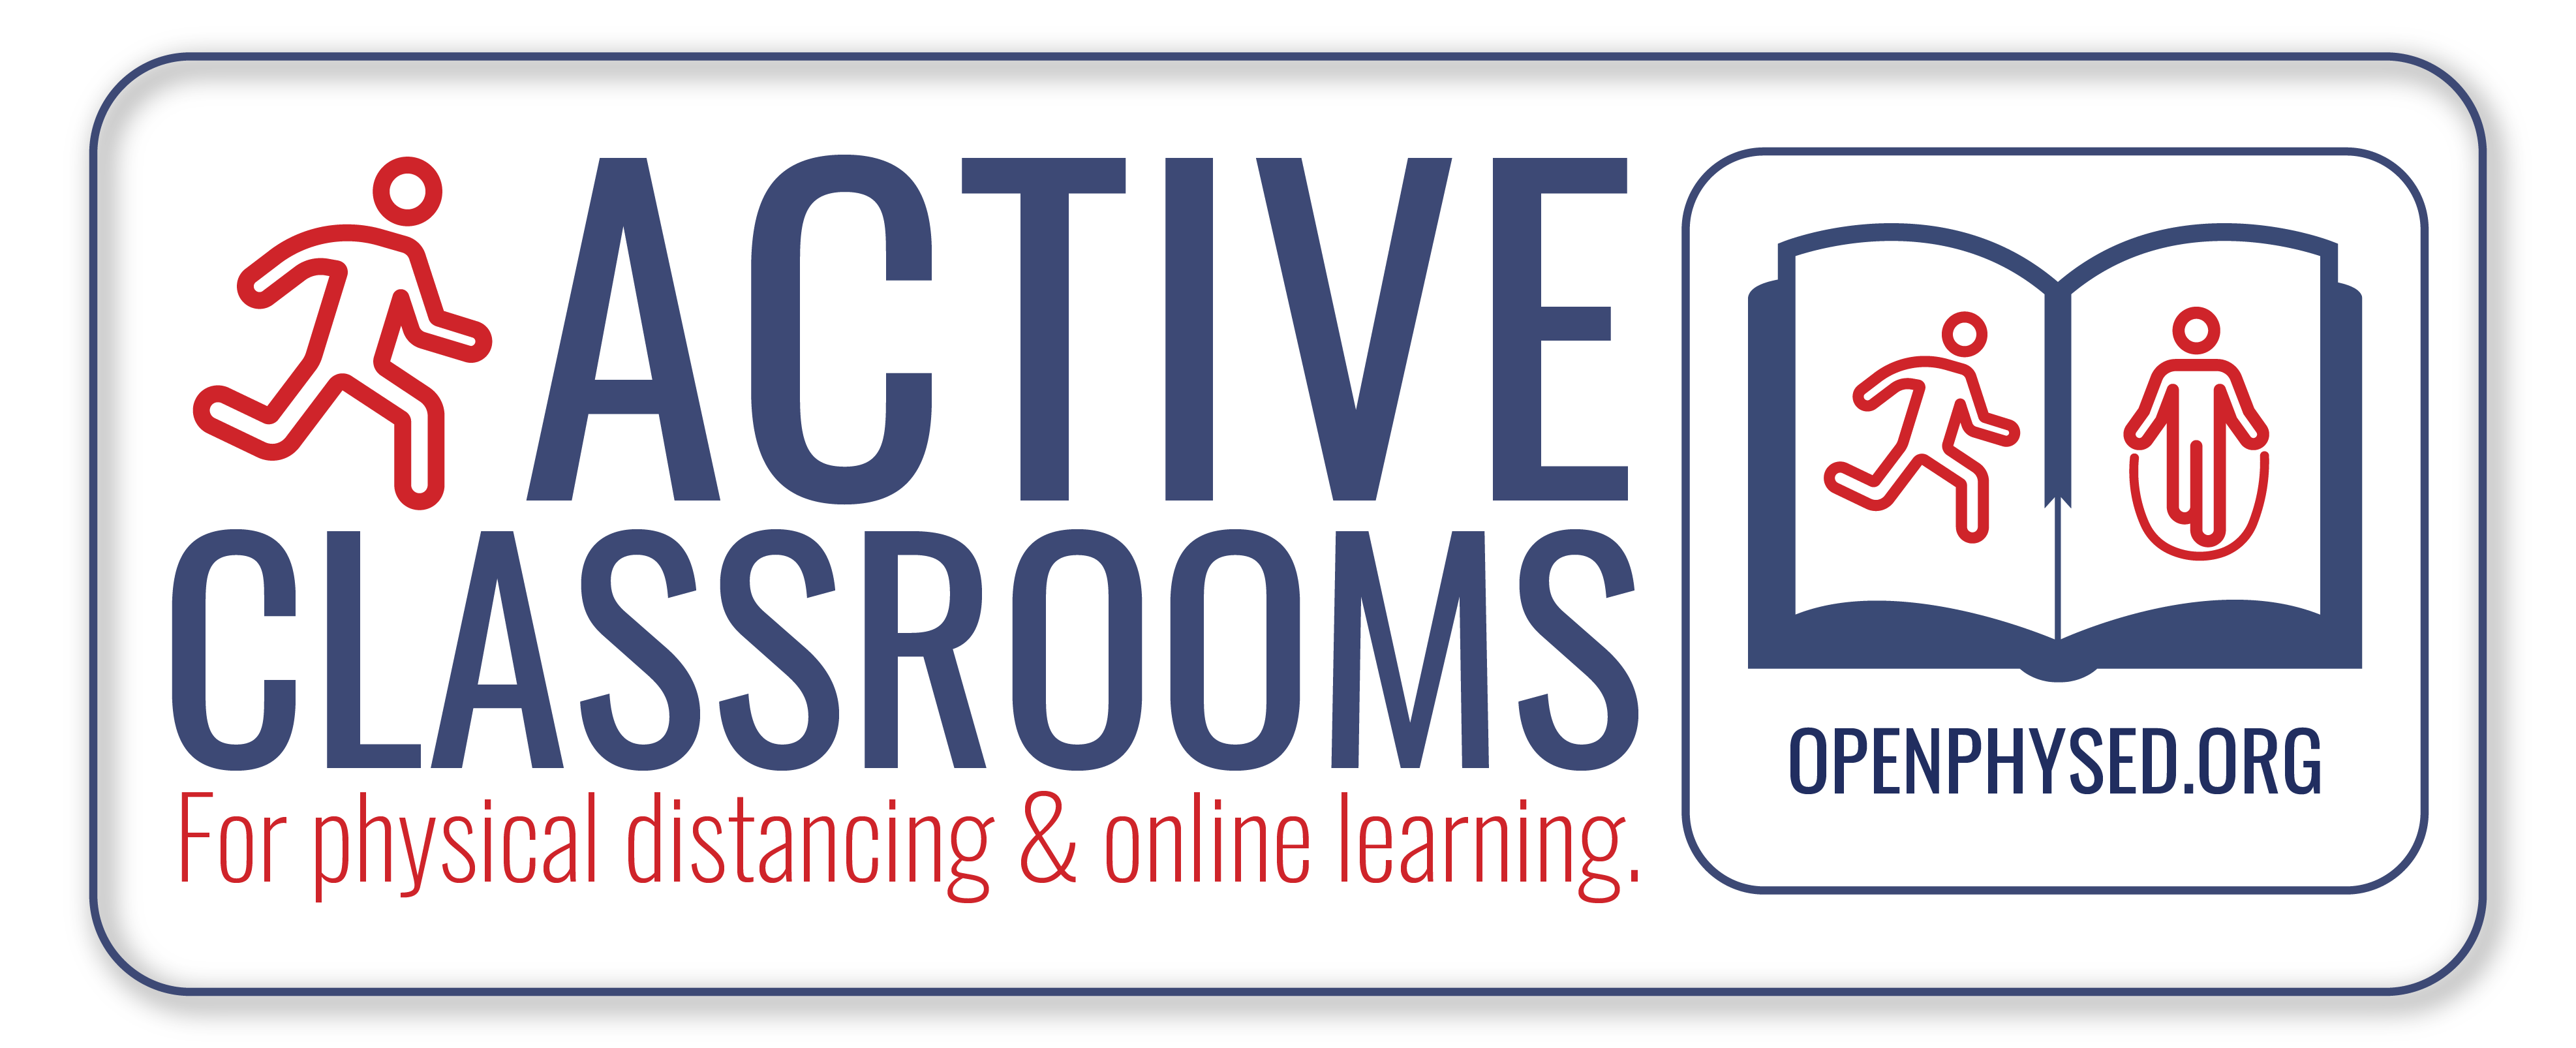 Active Classrooms for Physical distancing & online learning logo
